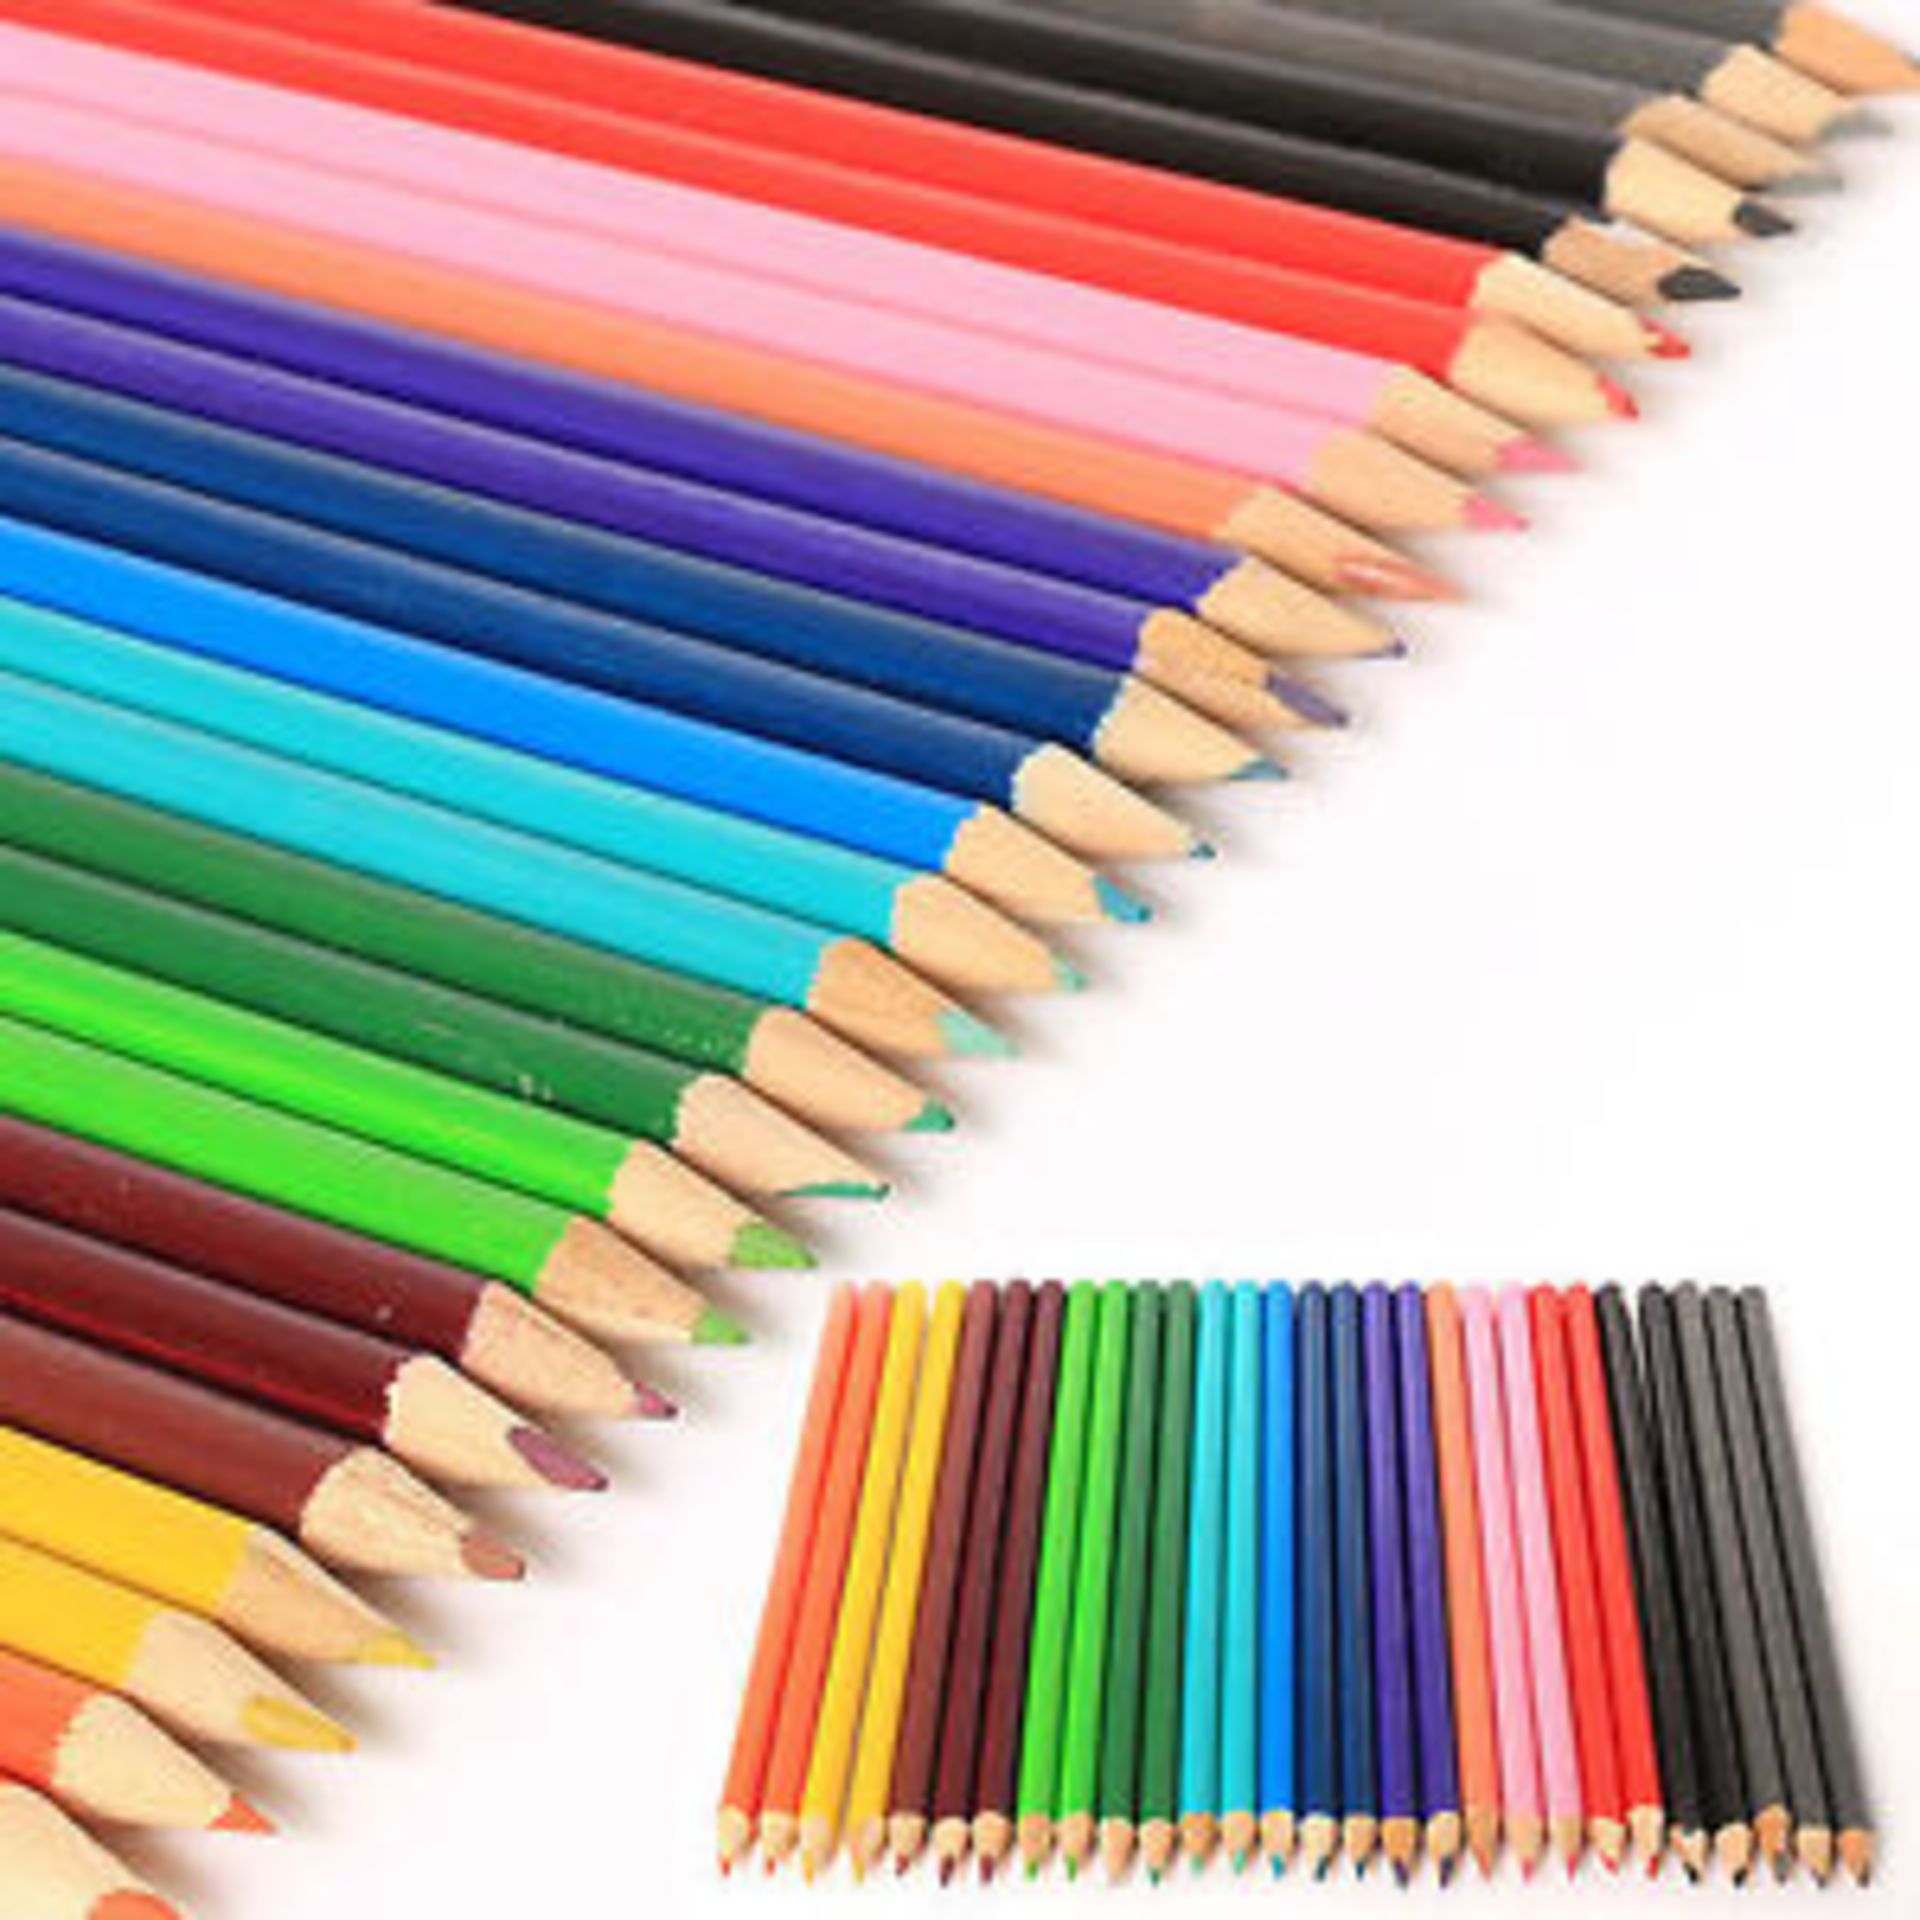 V *TRADE QTY* Brand New 30 Pack Professional Colouring Pencils - Artist Quality X 60 YOUR BID - Image 2 of 2